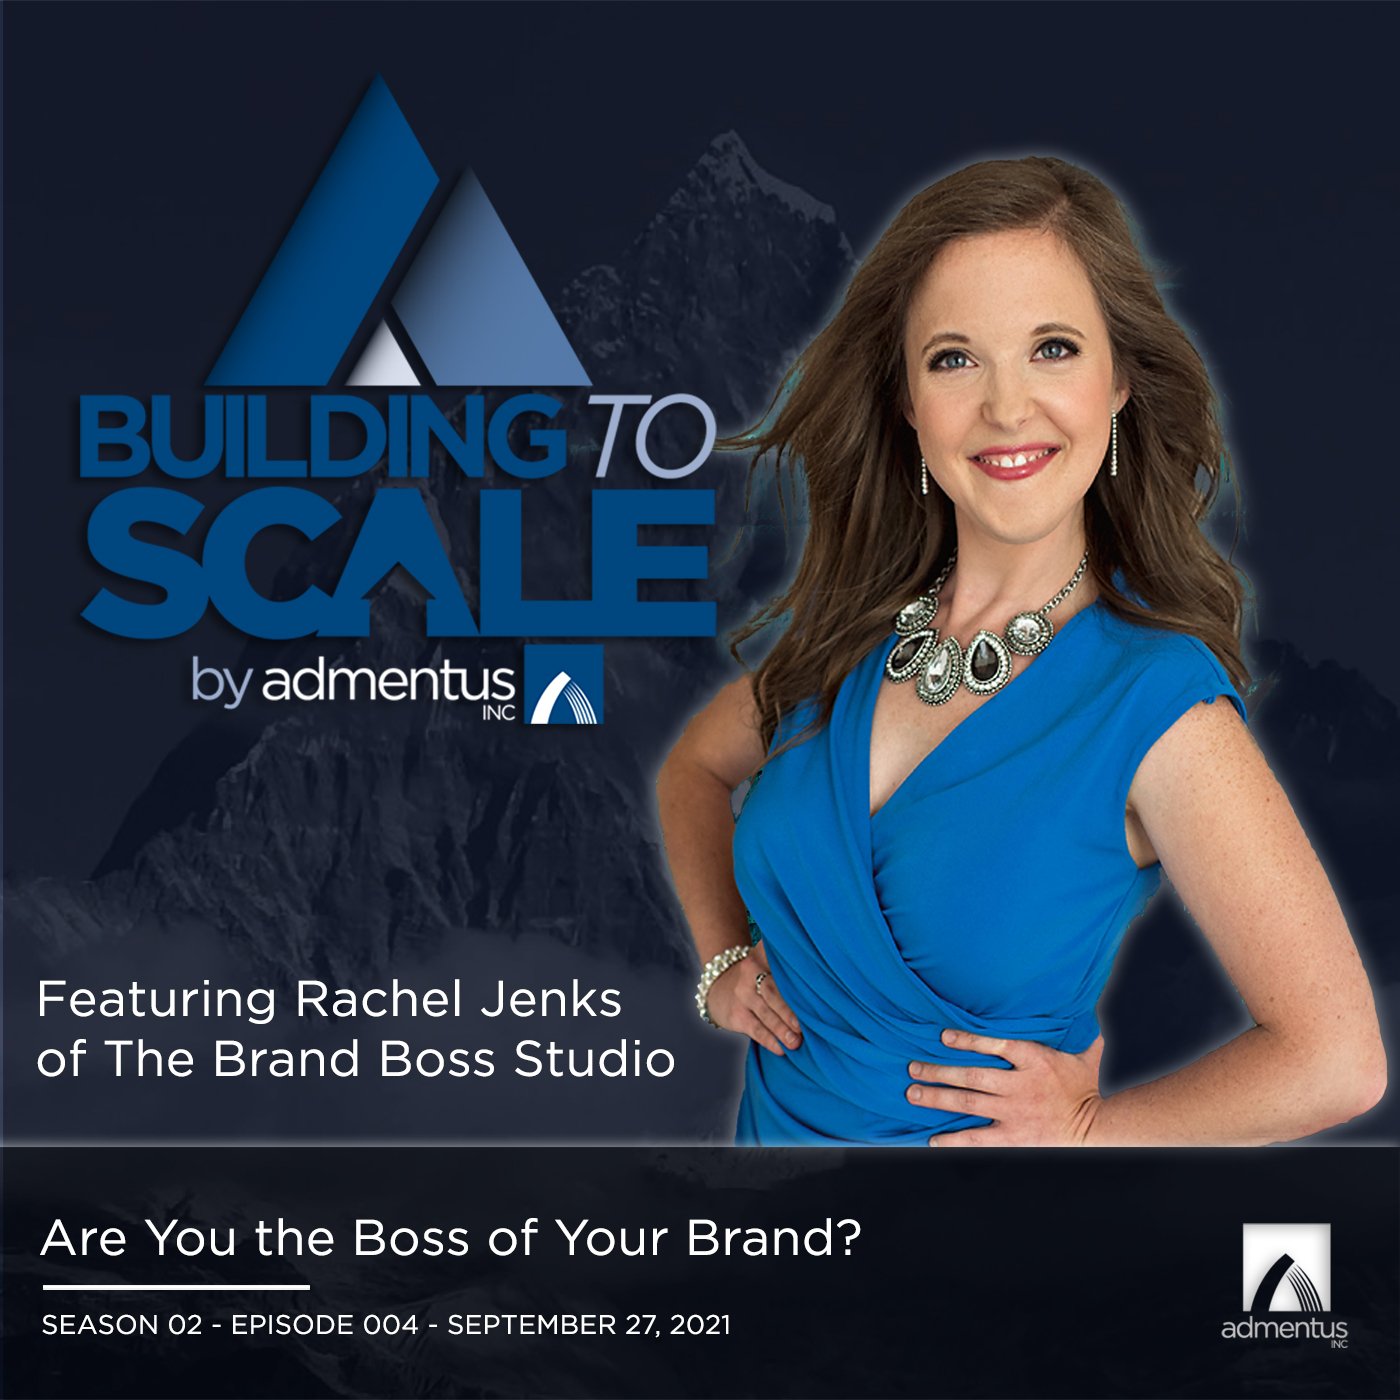 Are You the Boss of Your Brand?